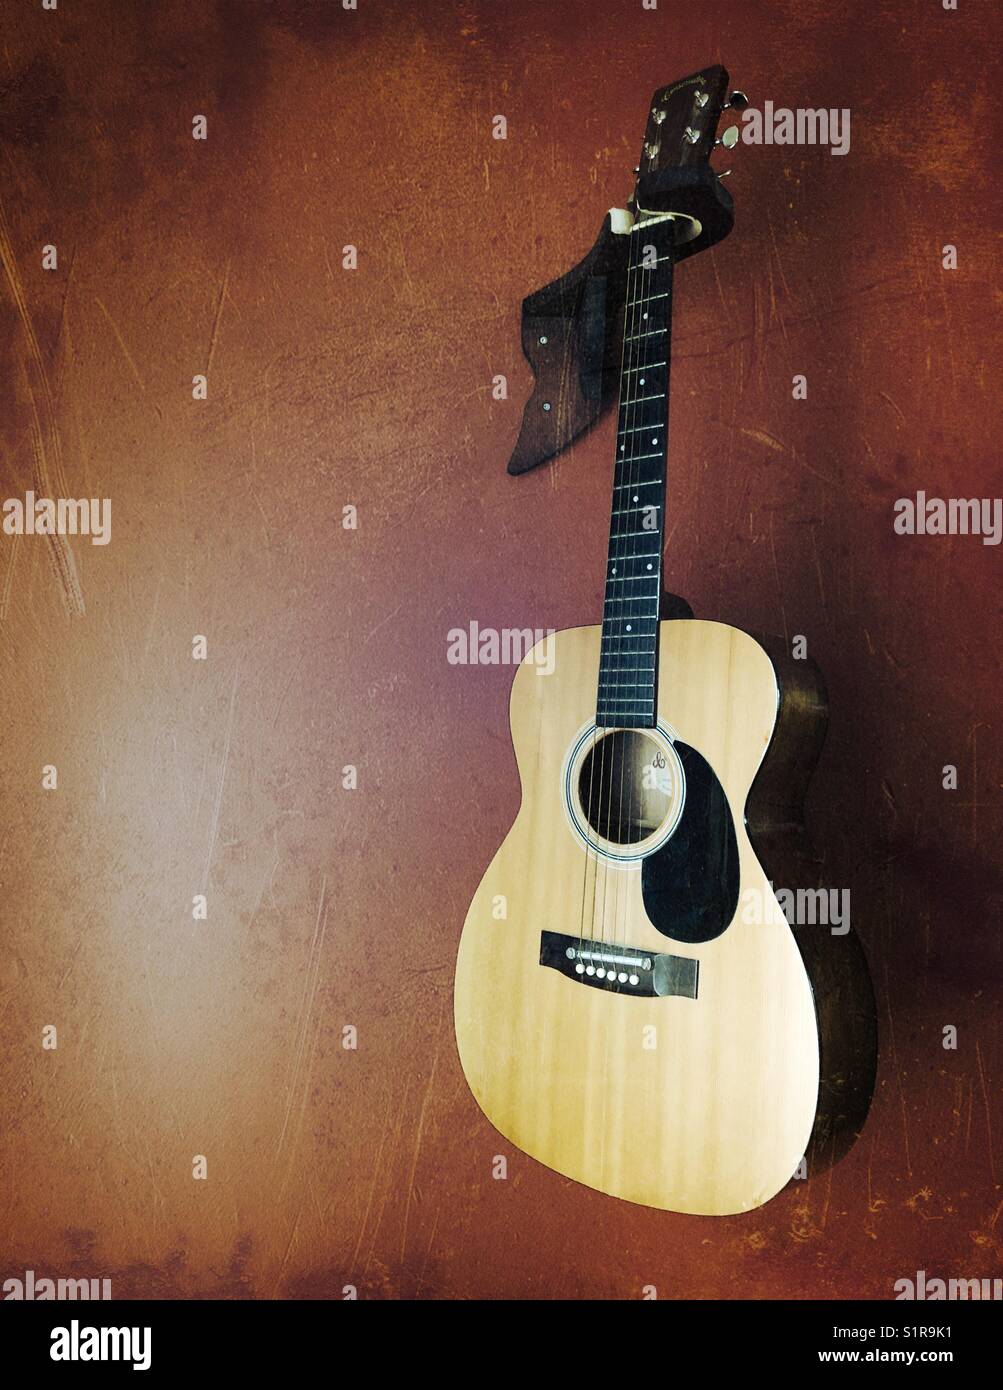 Portrait of an acoustic guitar hanging on a wall Stock Photo